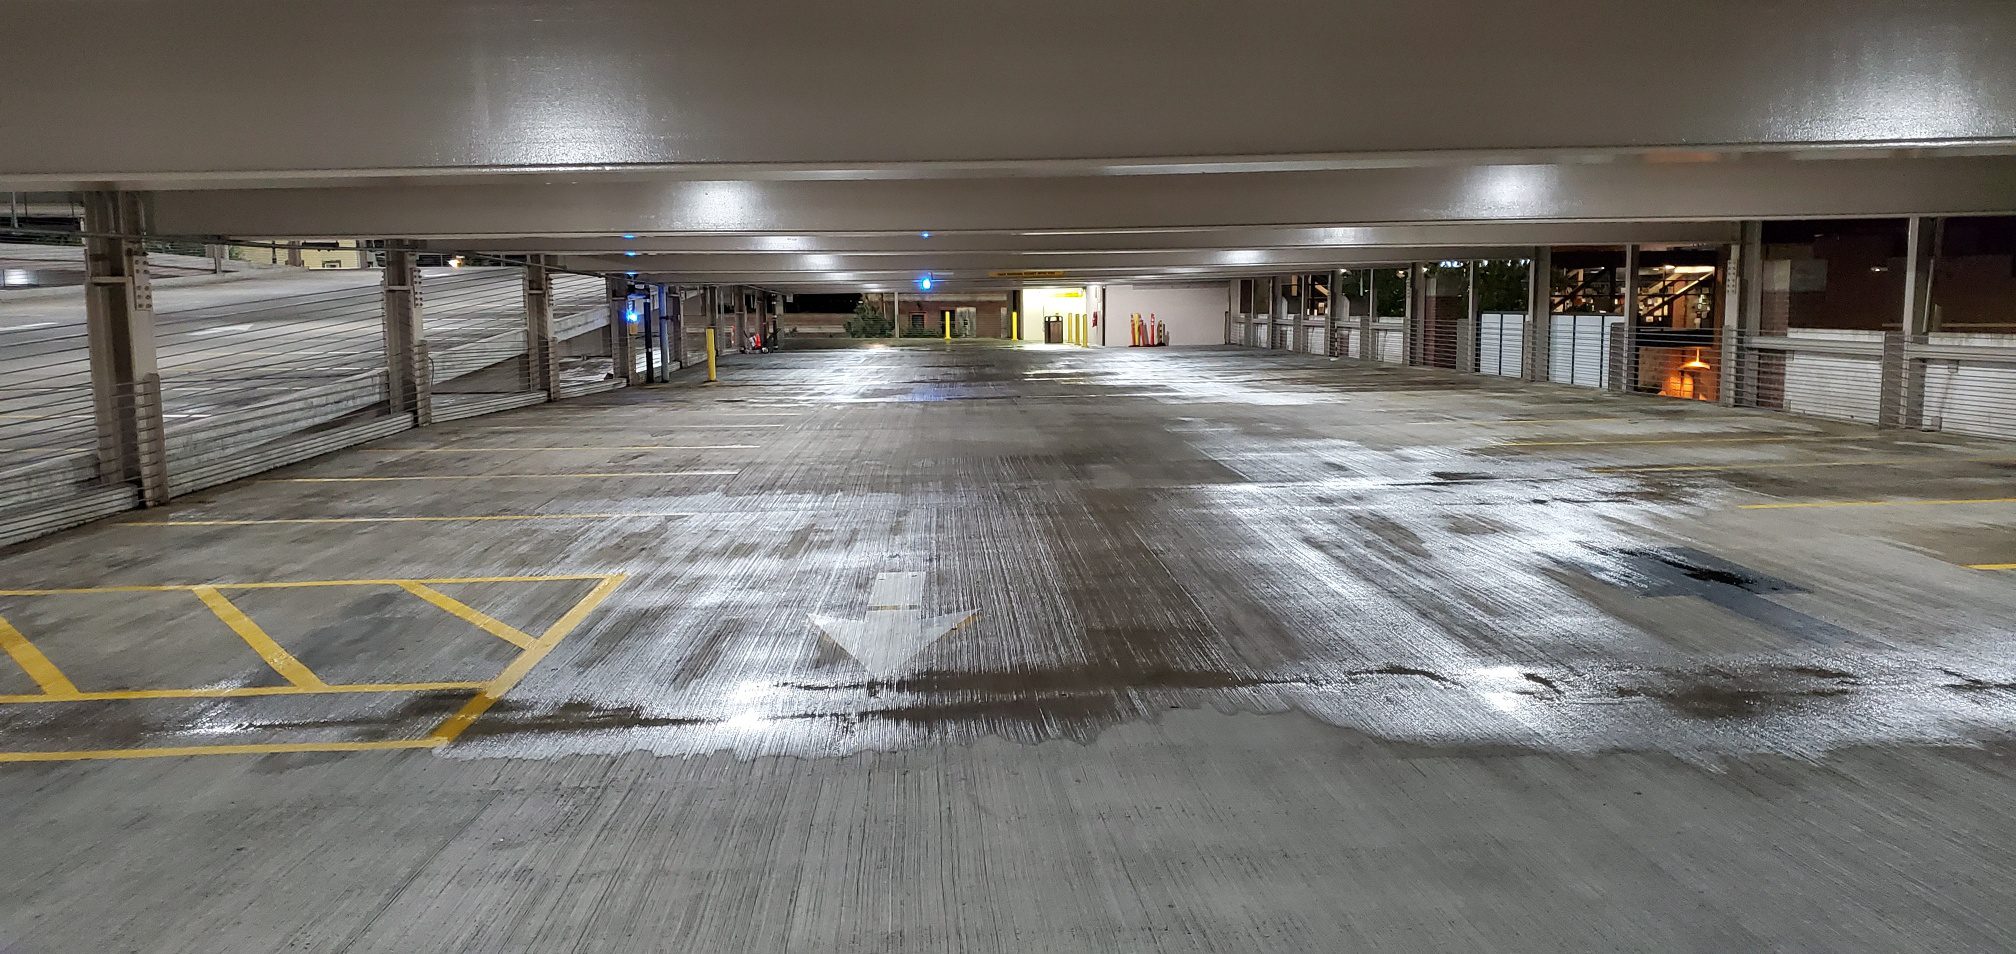 Parking Garage Cleaning NJ  #1 Parking Deck Cleaners in New Jersey